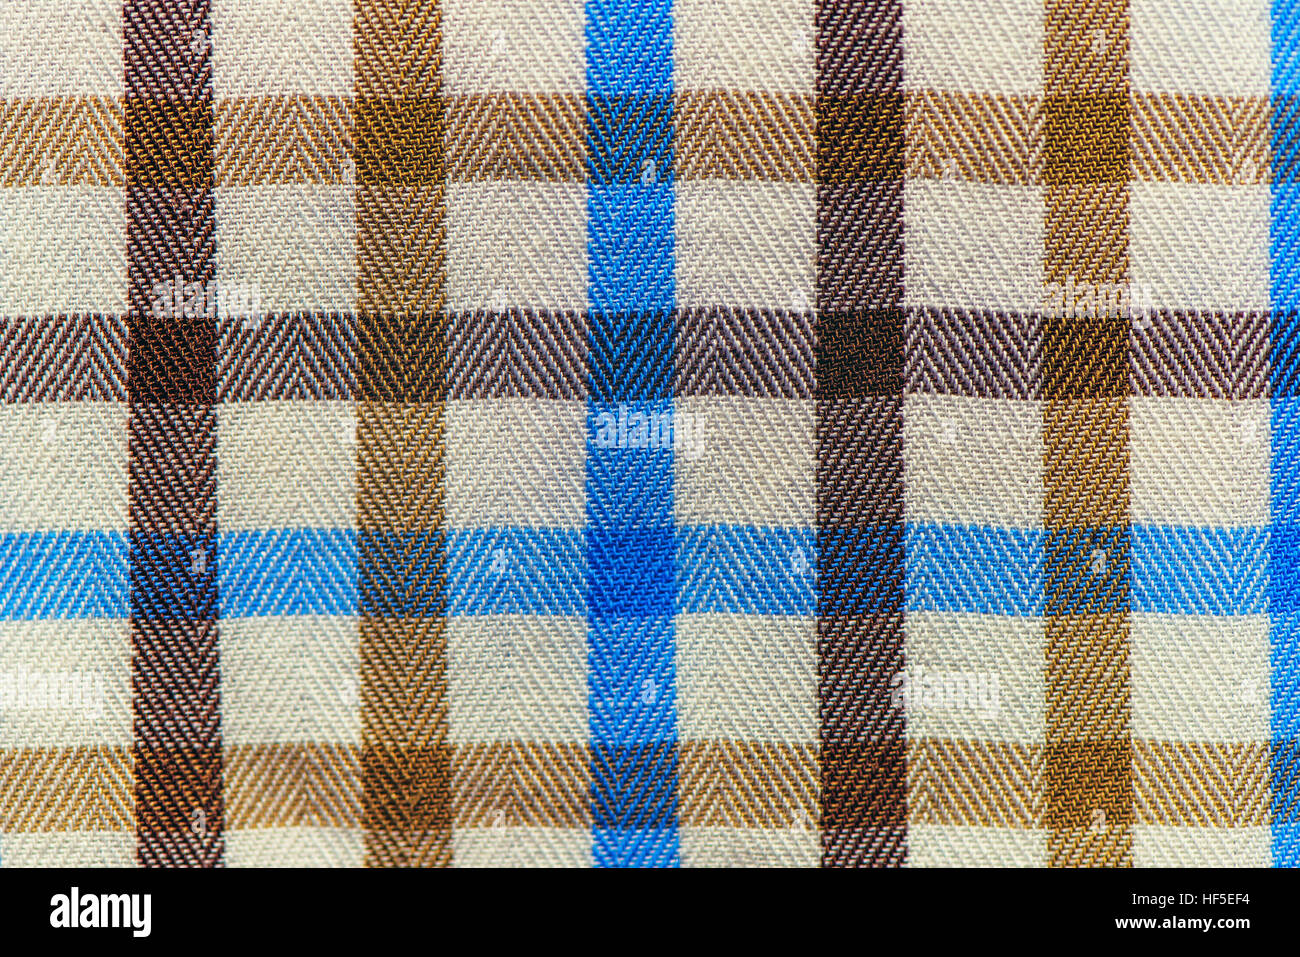 Plaid a scacchi materiale tessile texture pattern, macro Foto Stock